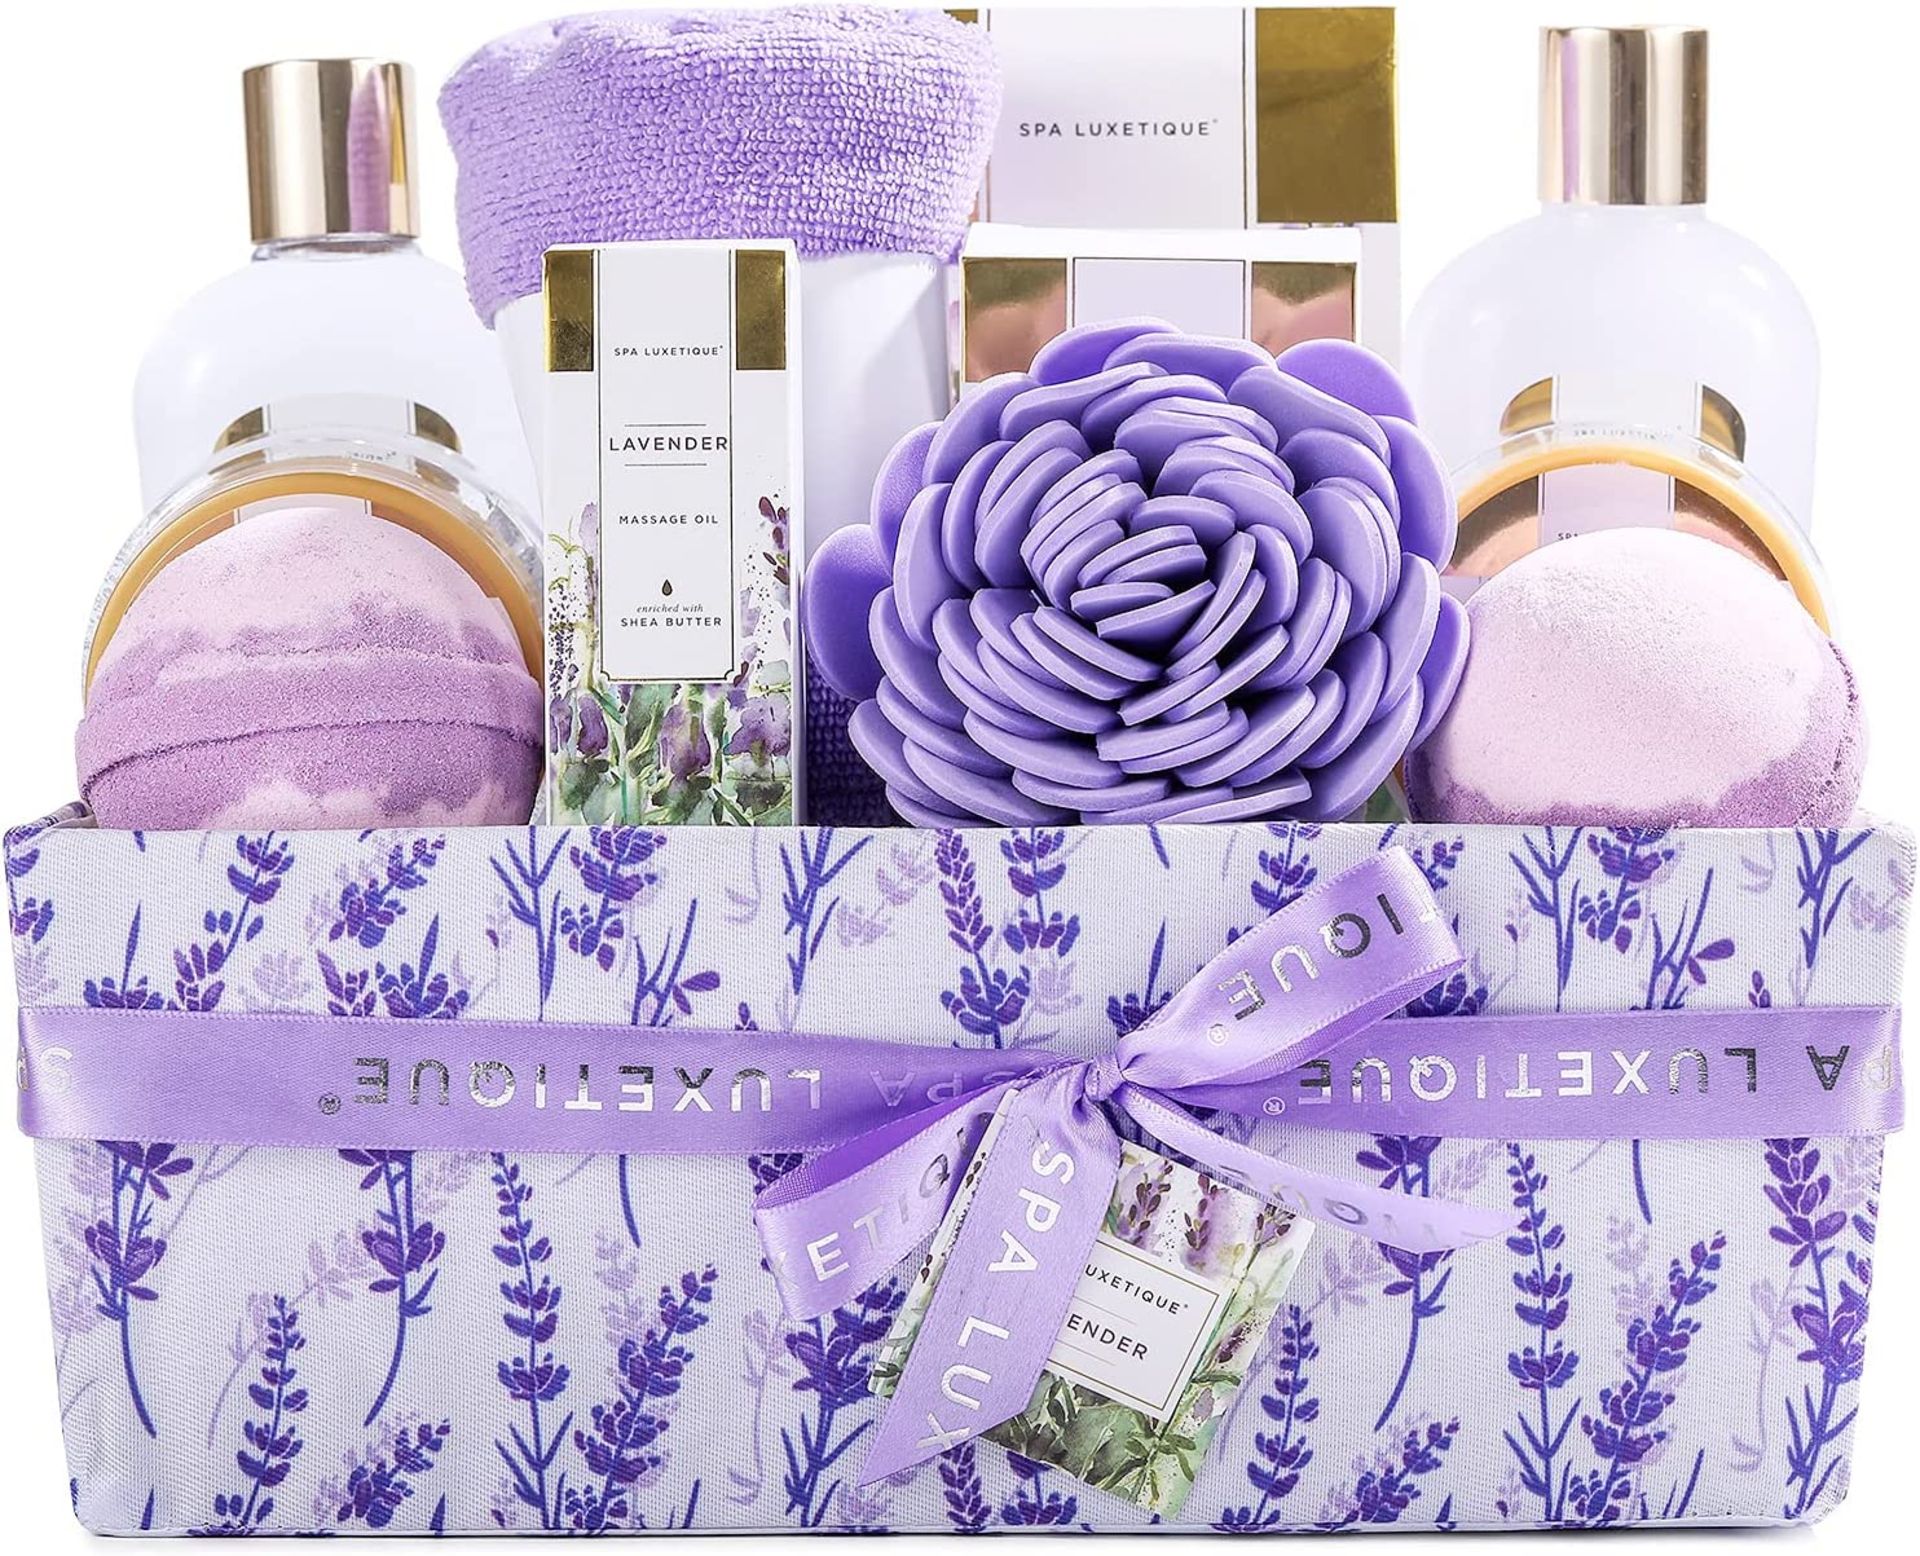 PALLET TO CONTAIN 24 X NEW PACKAGED 12 Piece Lavender Bath & Shower Gift Basket. (SKU:SPA-3-LAV).